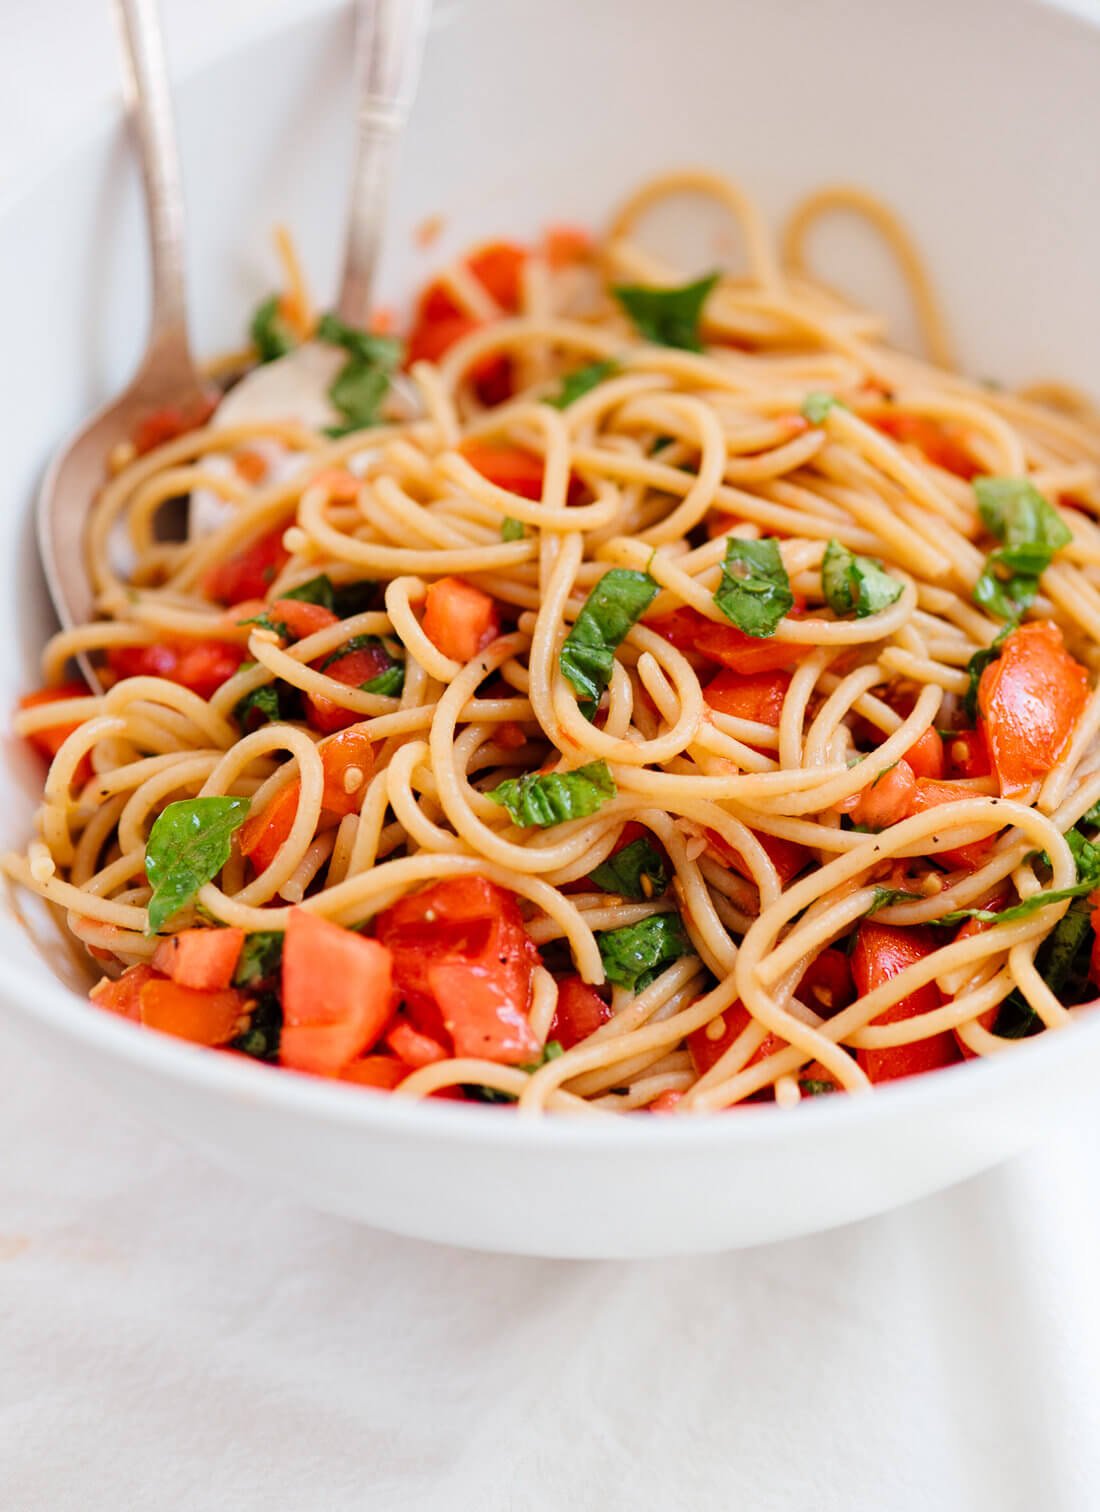 Spaghetti with fresh tomato sauce, perfect for those ripe summer tomatoes!